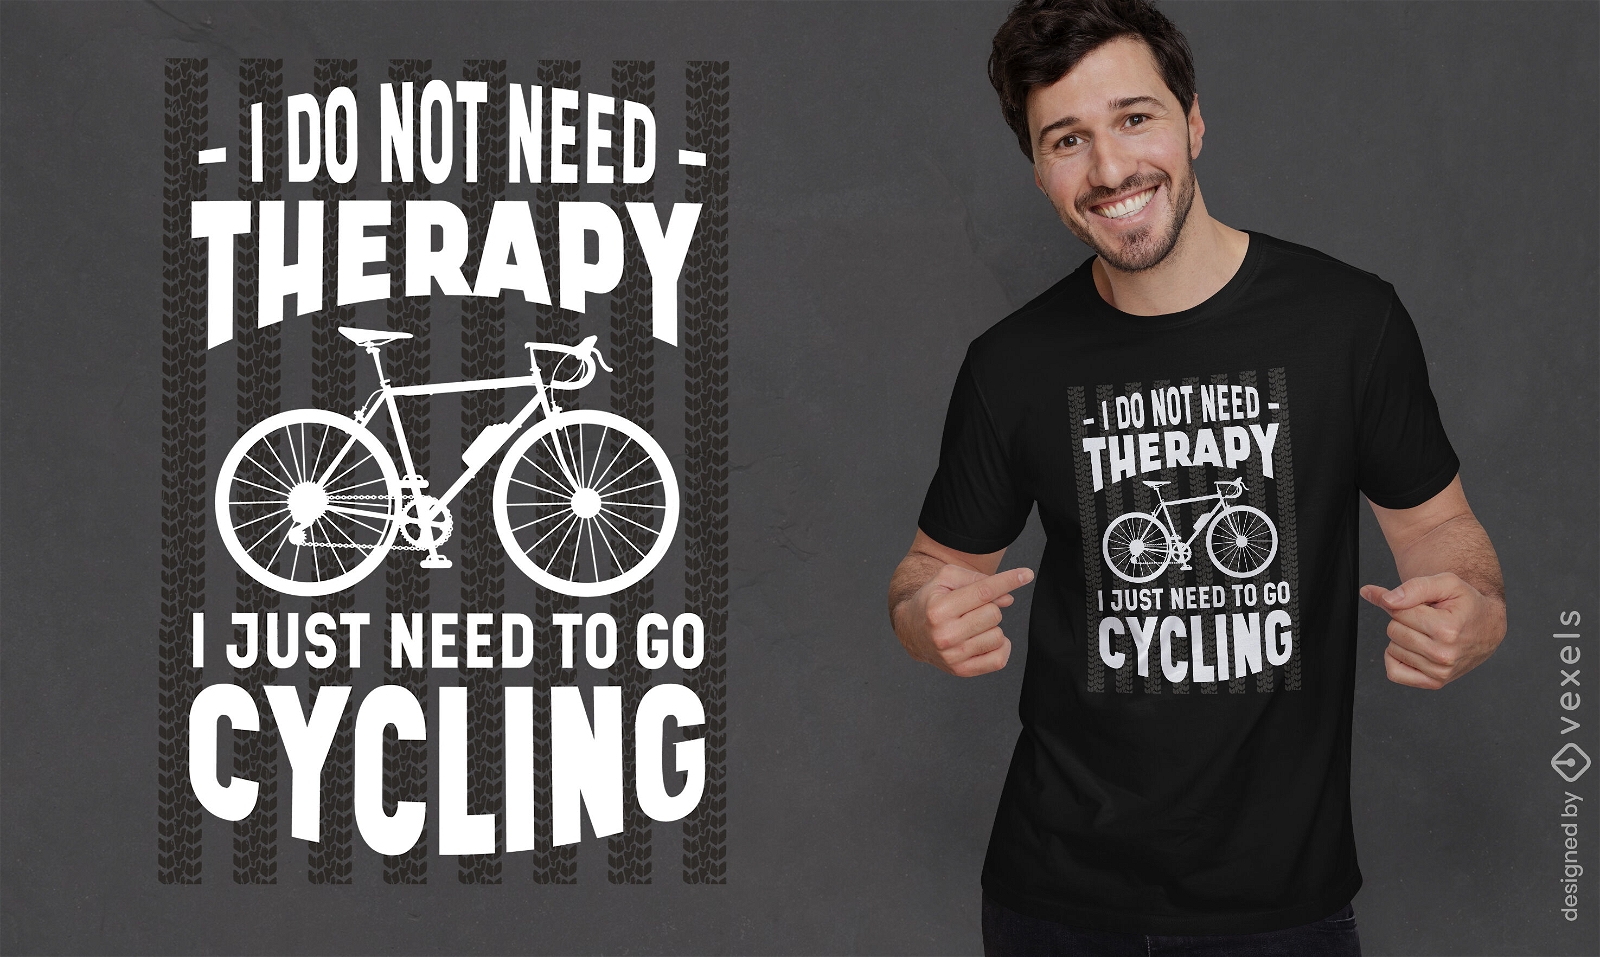 Bicycle therapy quote t-shirt design